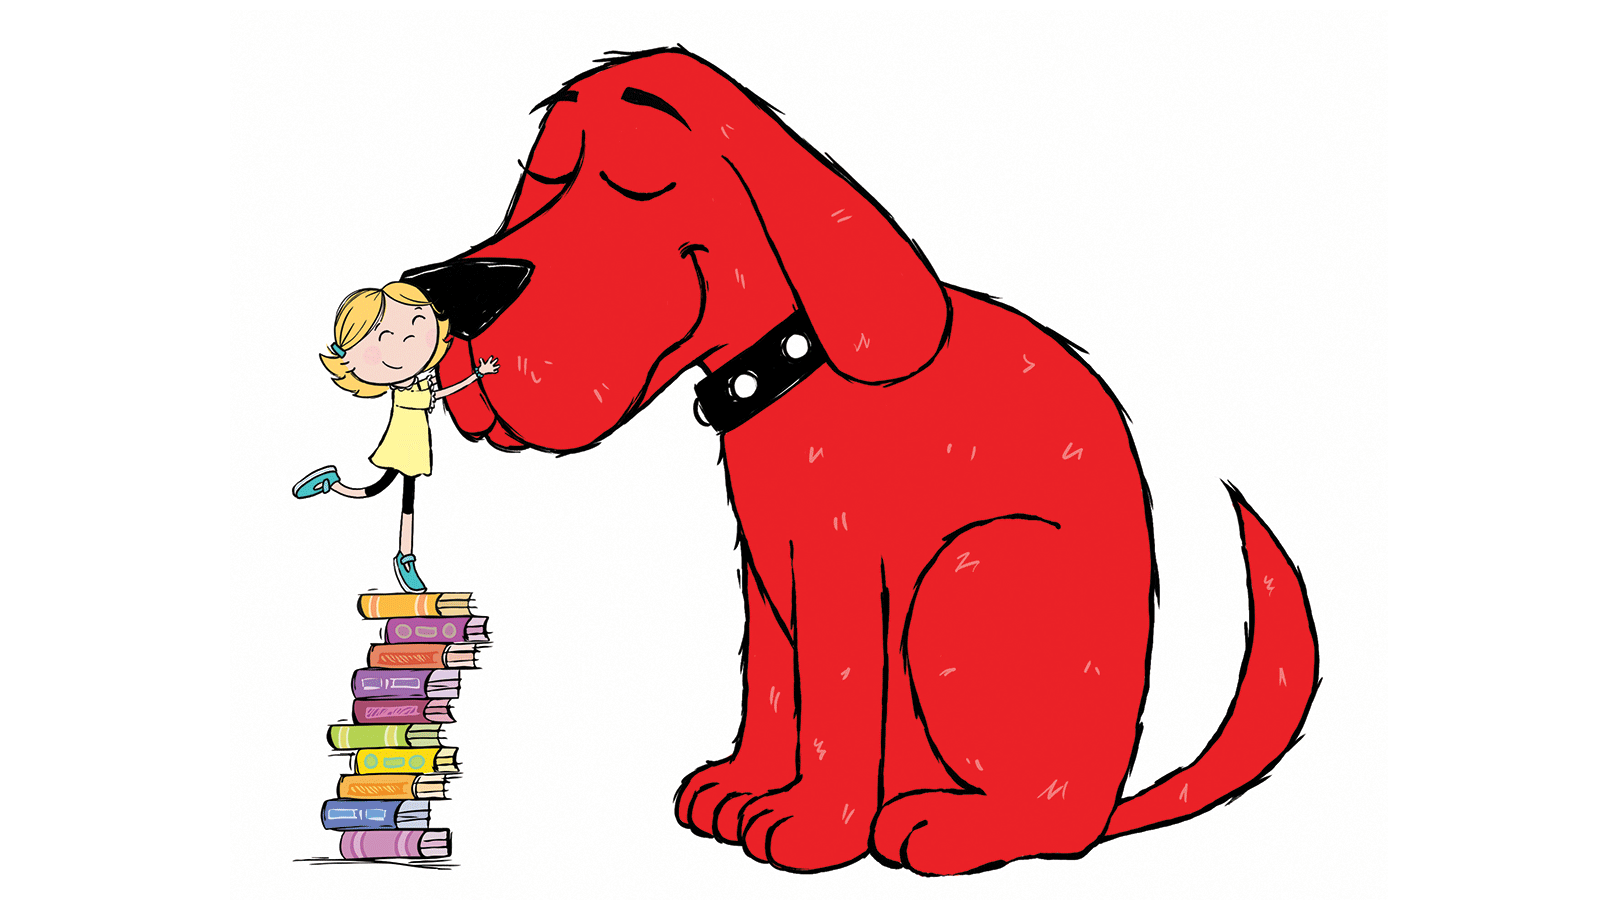 Clifford the Big Red Dog Premieres on PBS KIDS